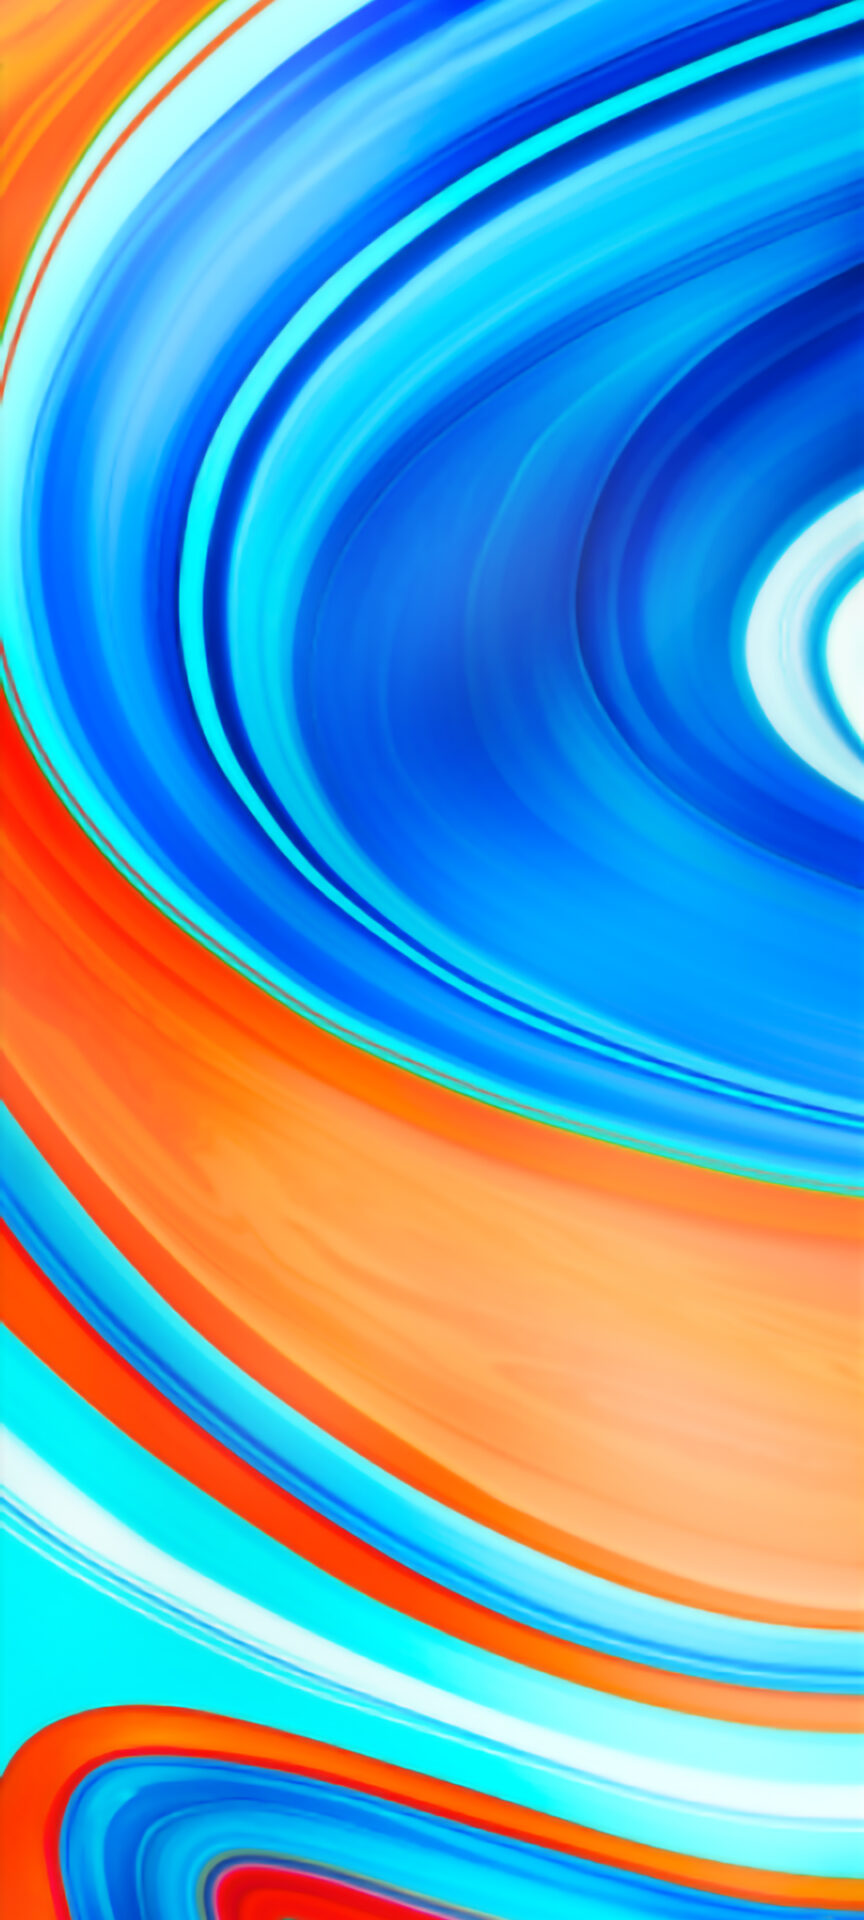 Redmi note series wallpapers stock